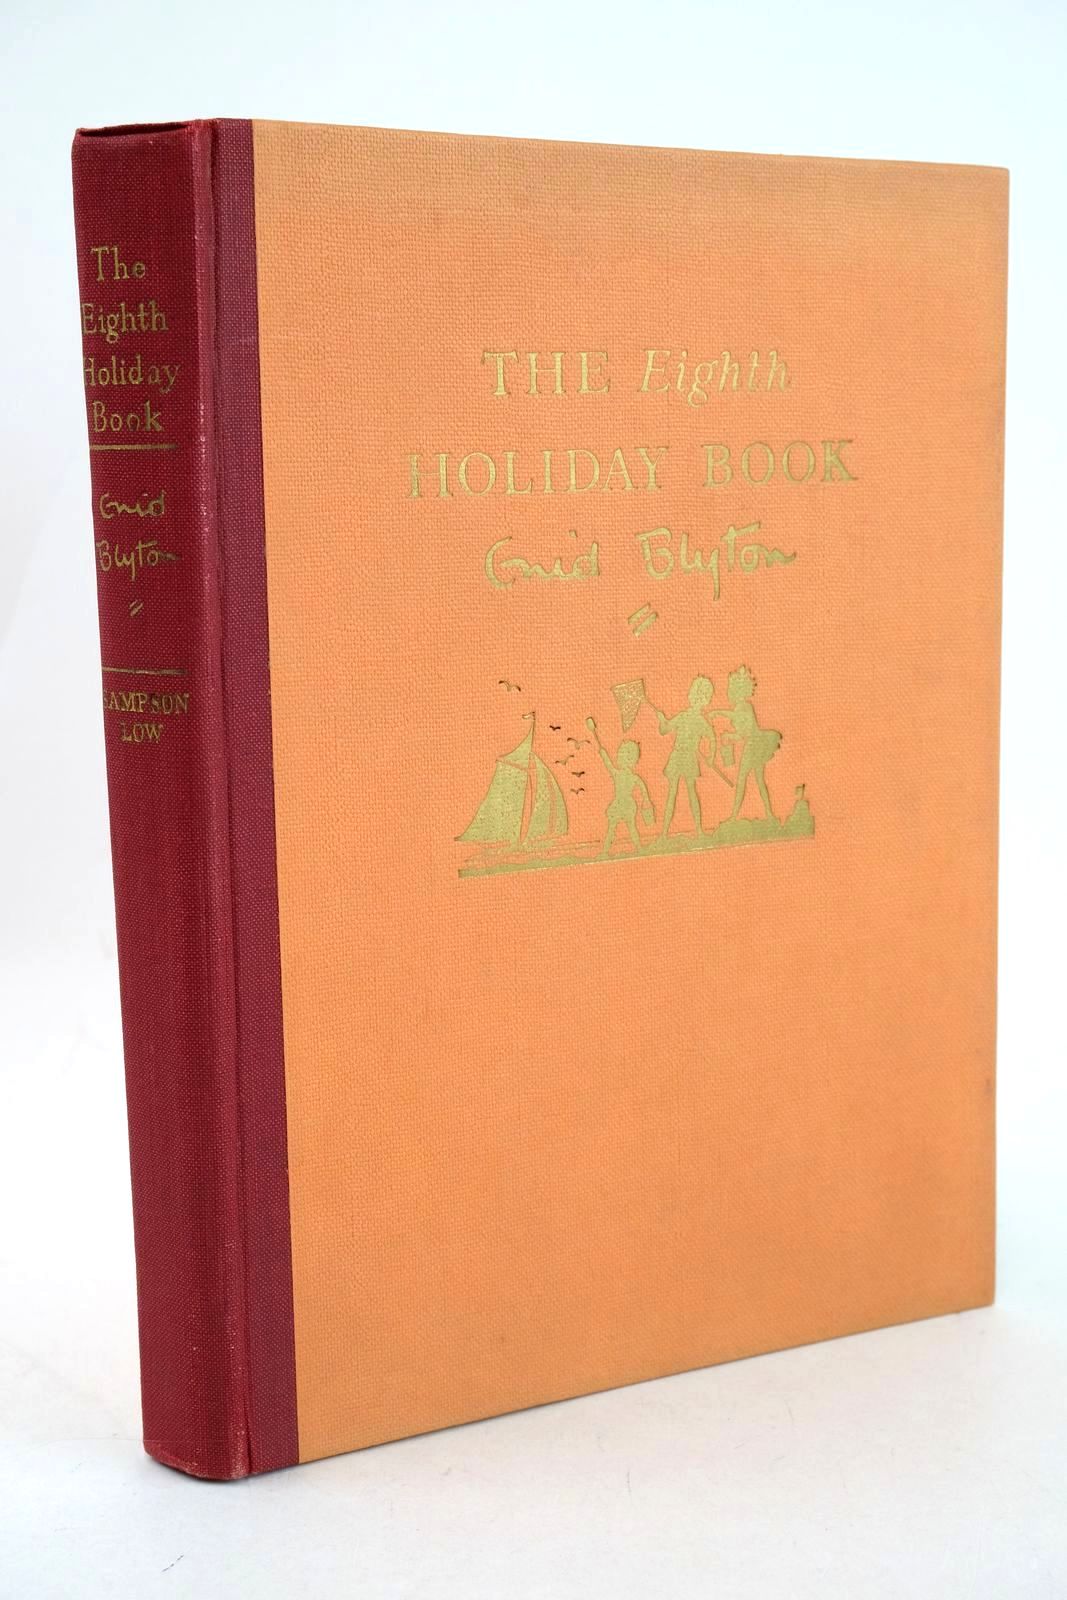 Photo of THE EIGHTH HOLIDAY BOOK- Stock Number: 1326831